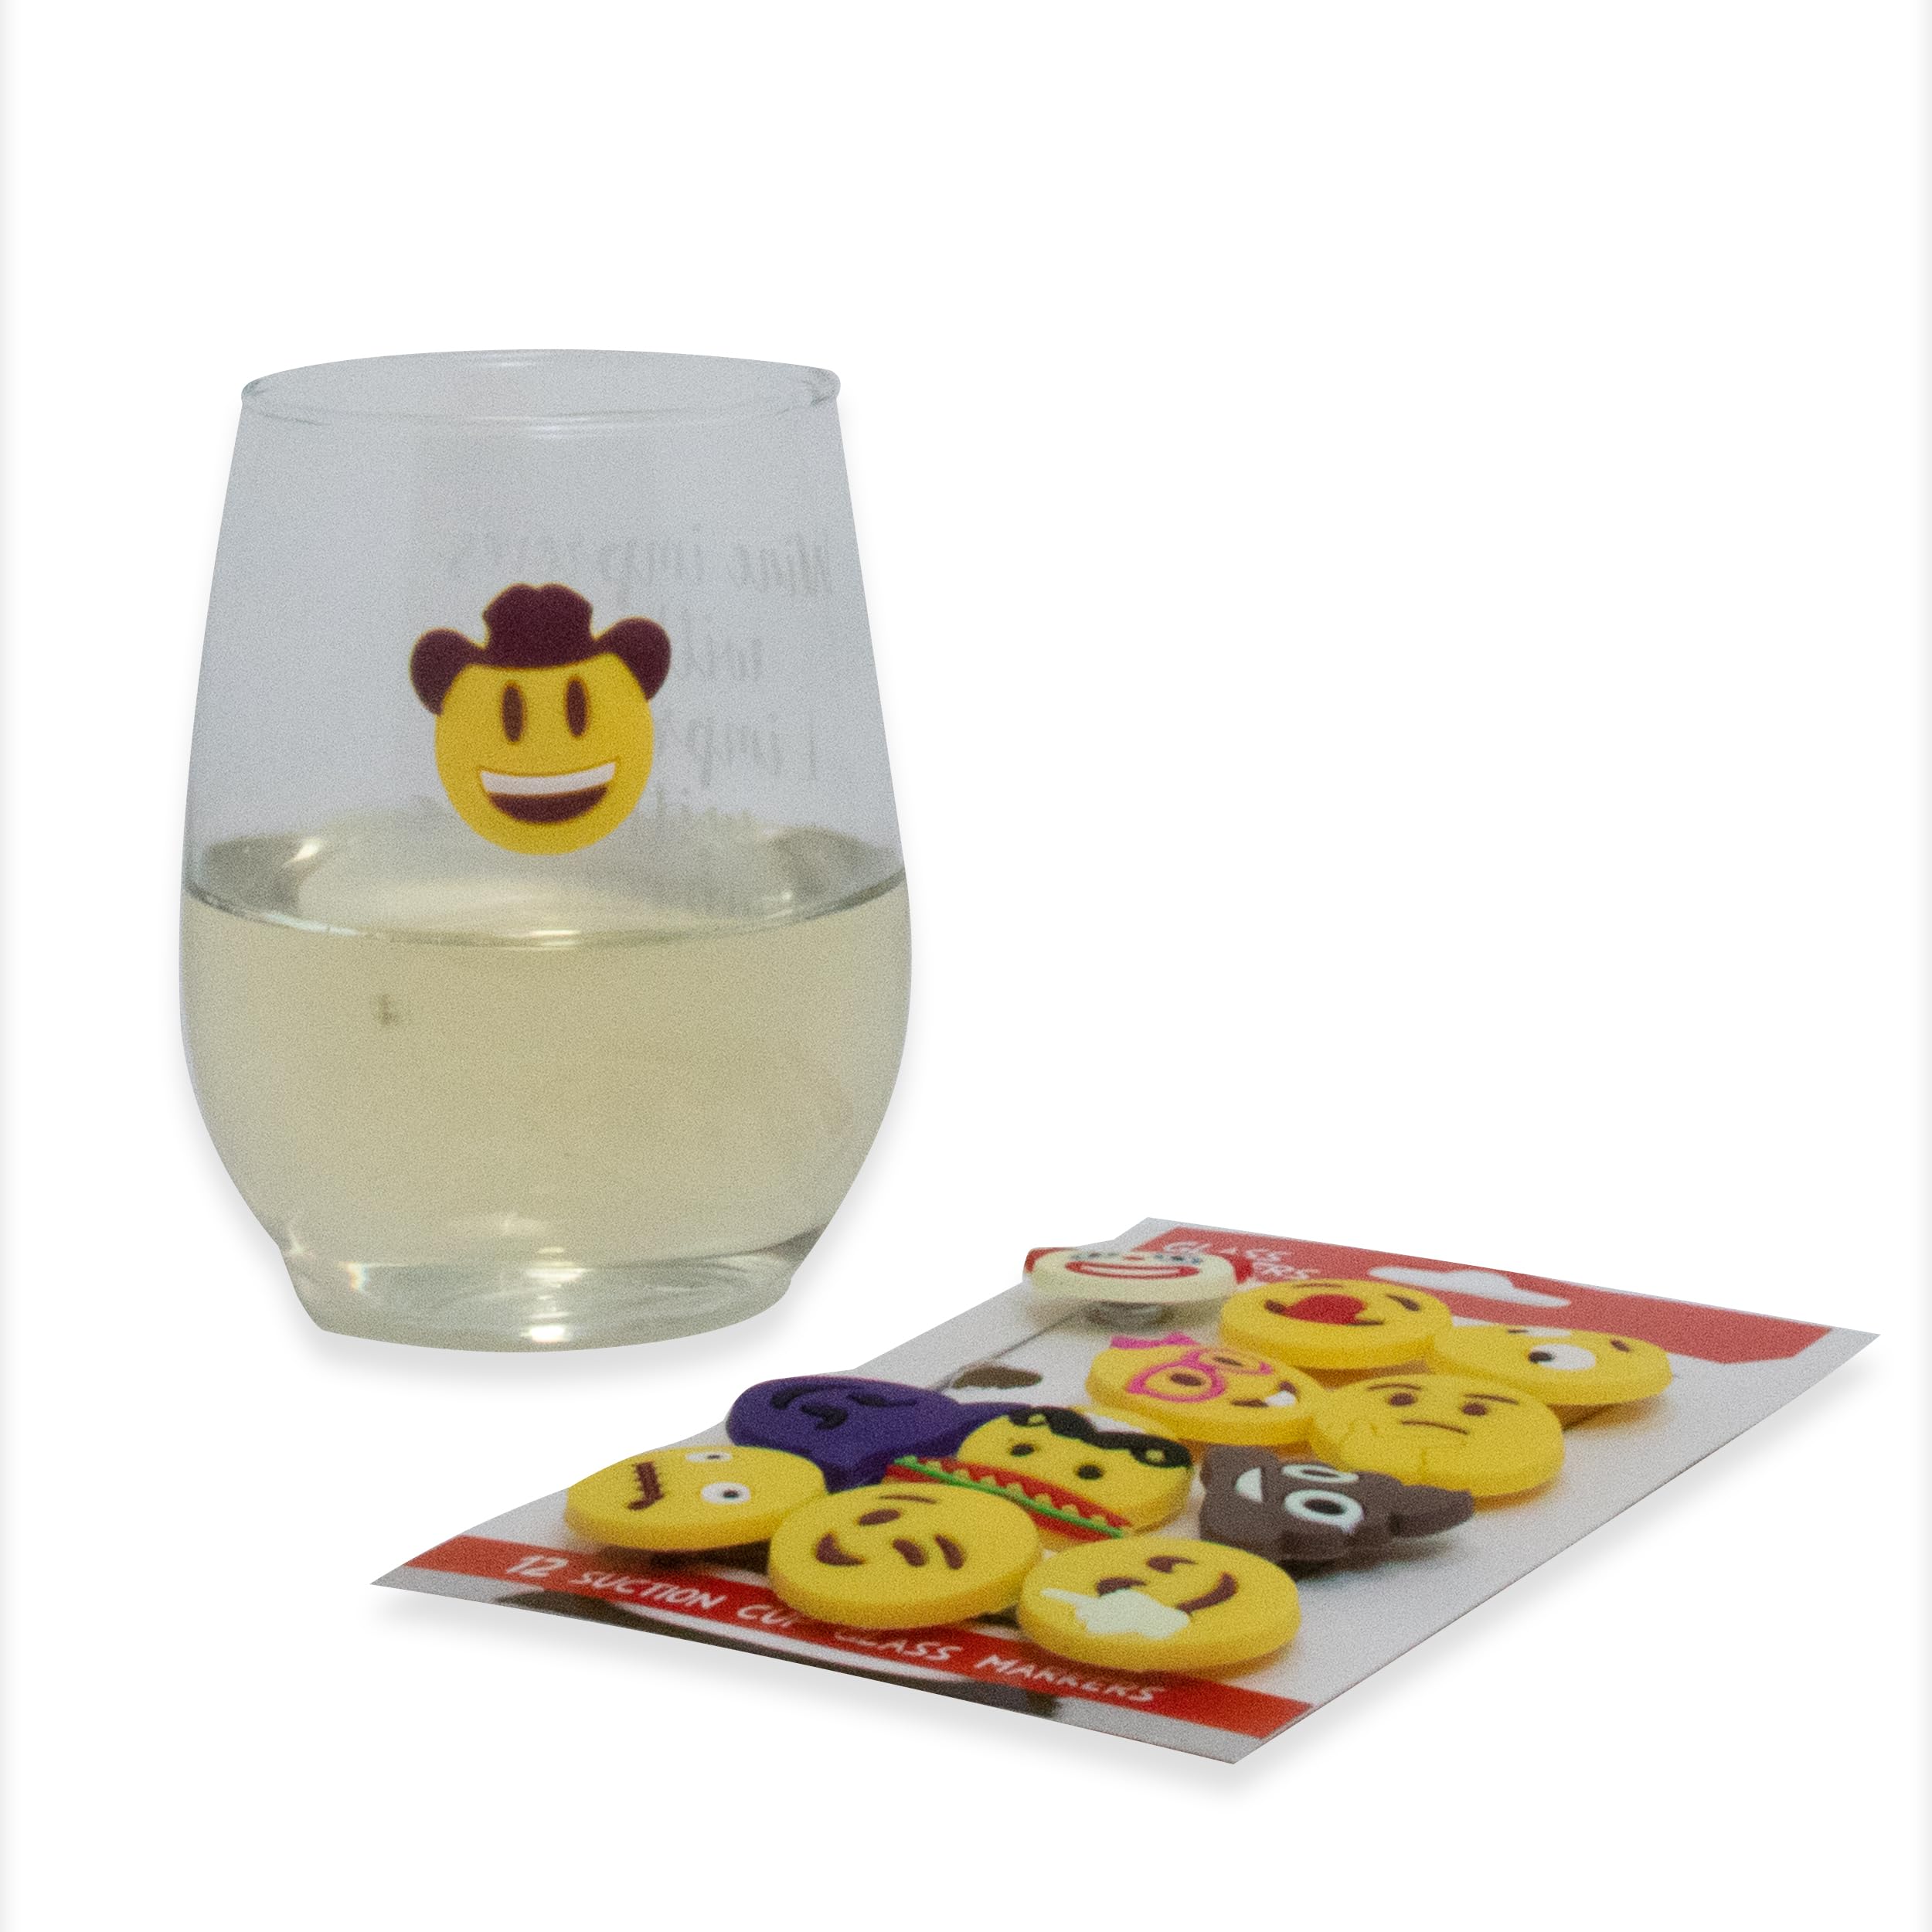 Emoji Charms with Suction 12 Pack, Perfect Markers for Everything from Wine Glass to Red Cups! Lifetime (Multi-Color)